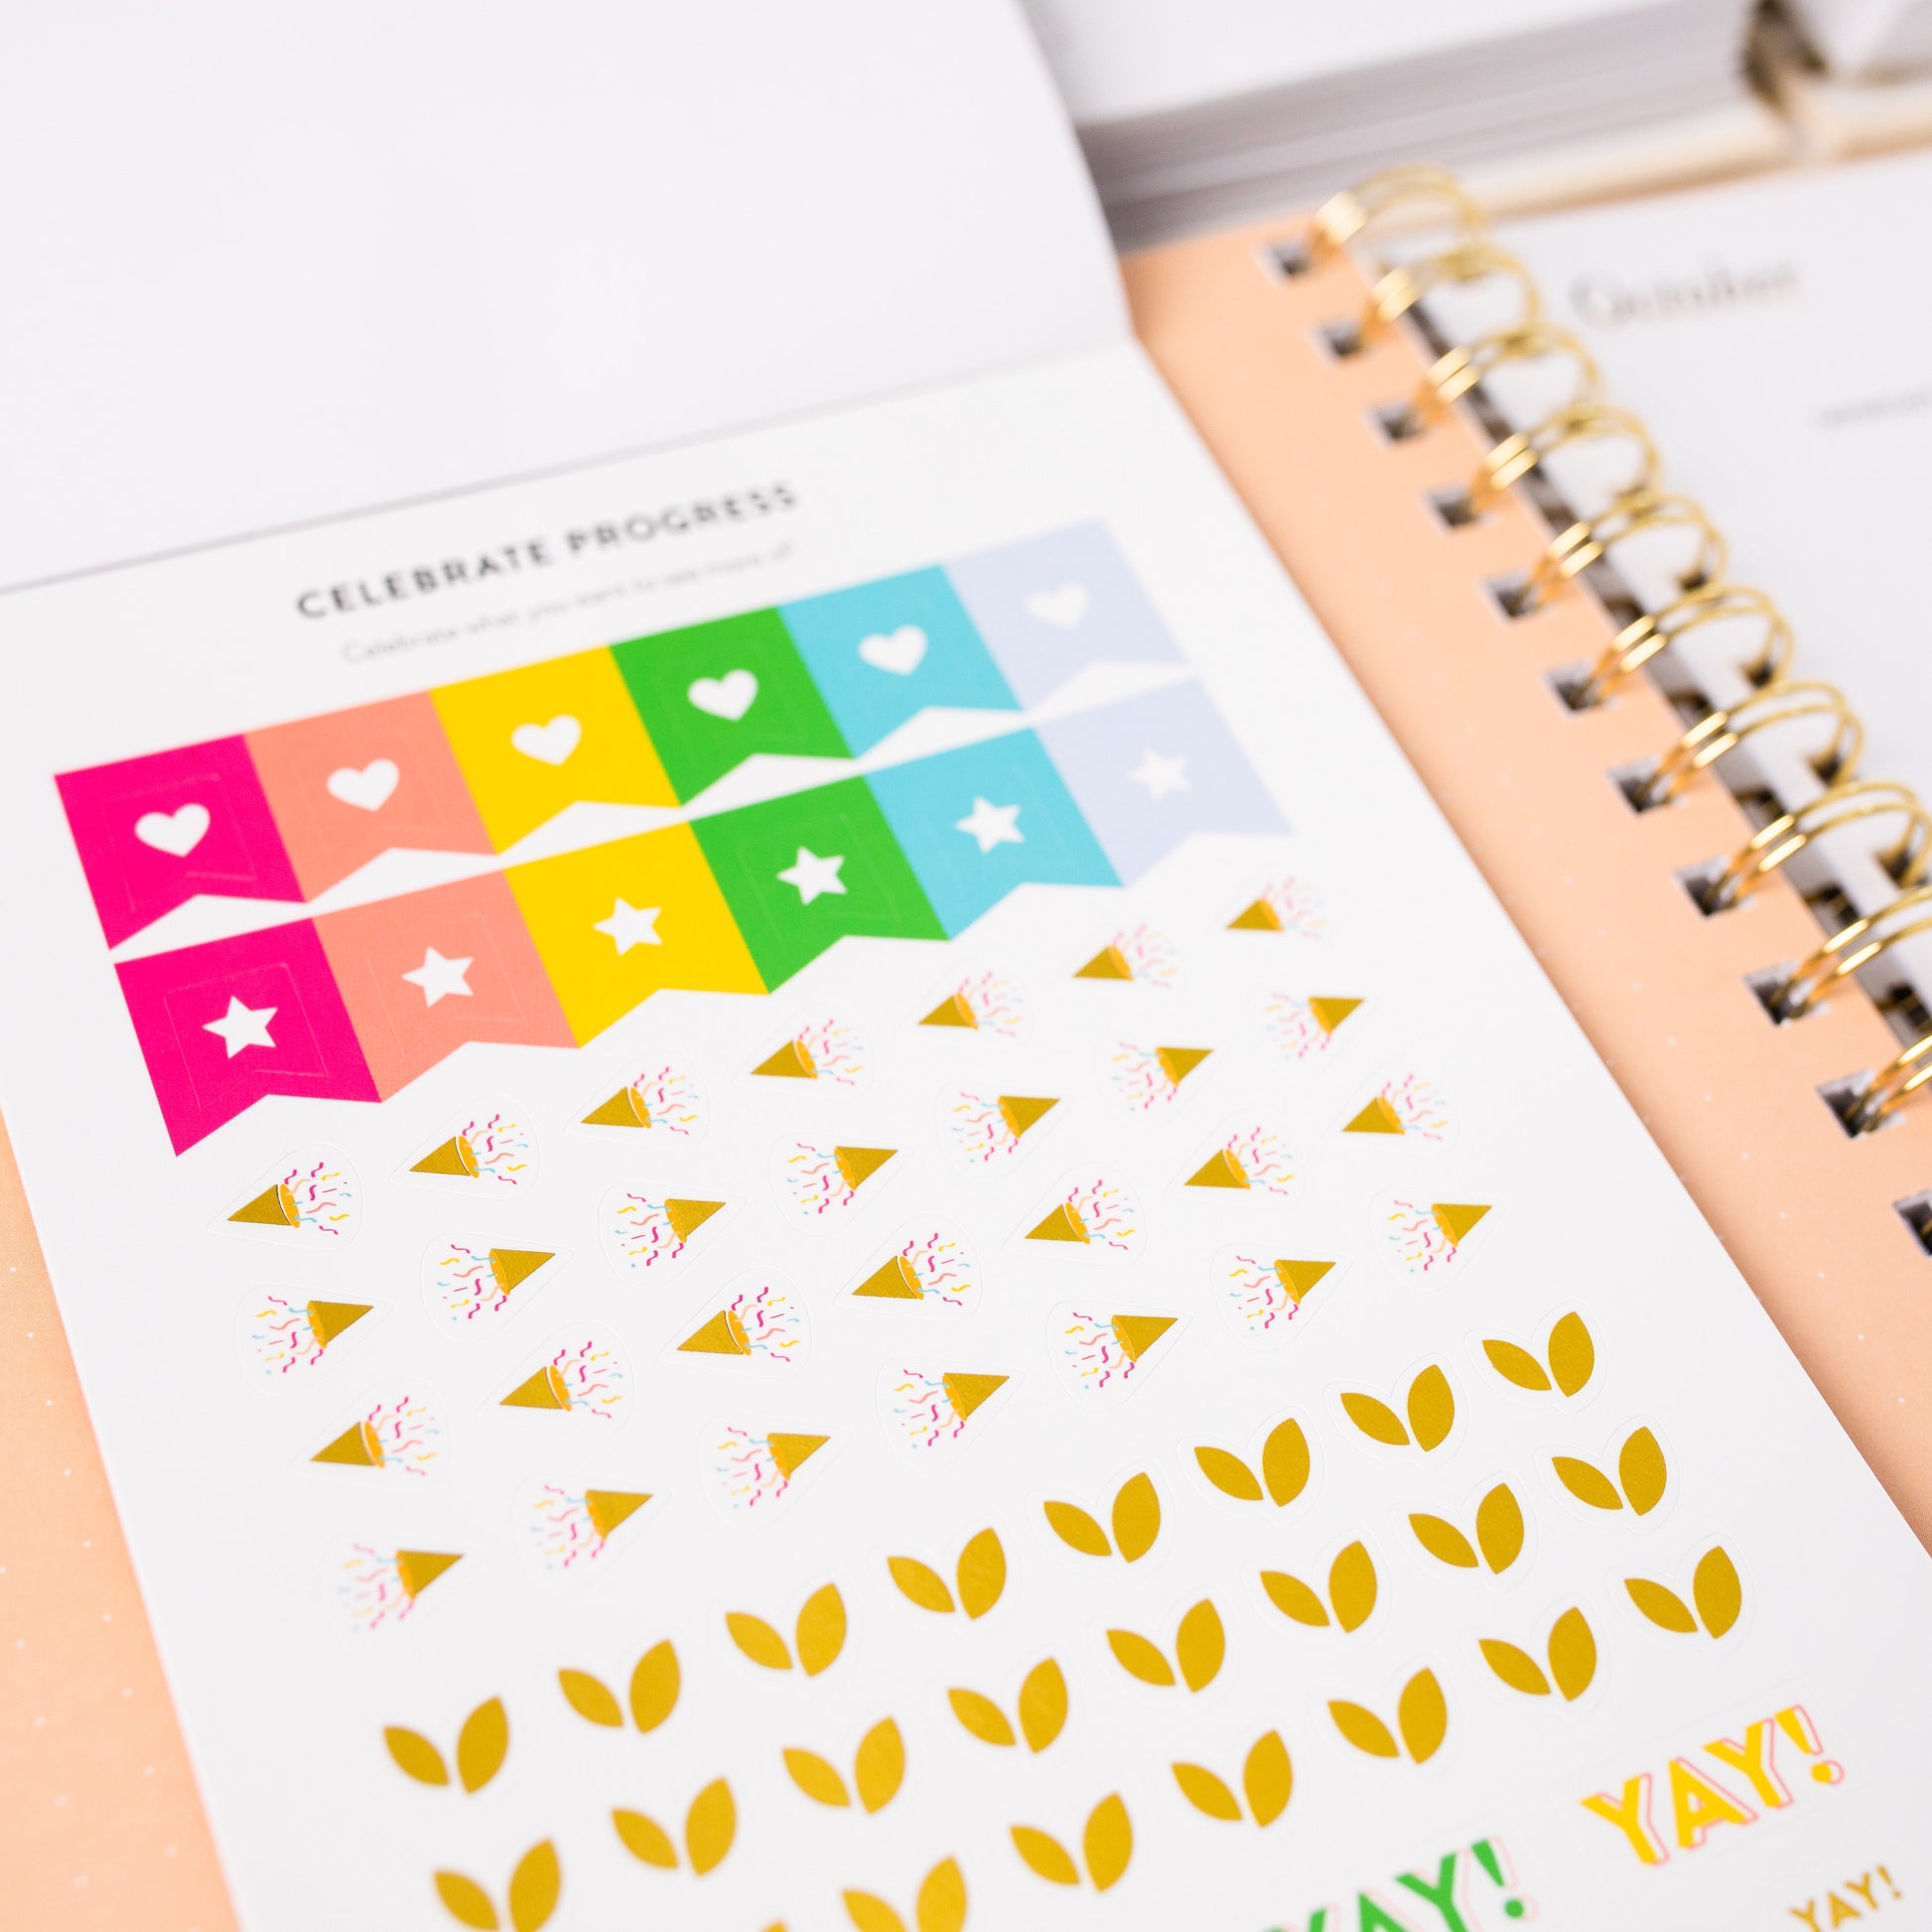 Yearly goals journal prompts stickers – Every Minute A Story